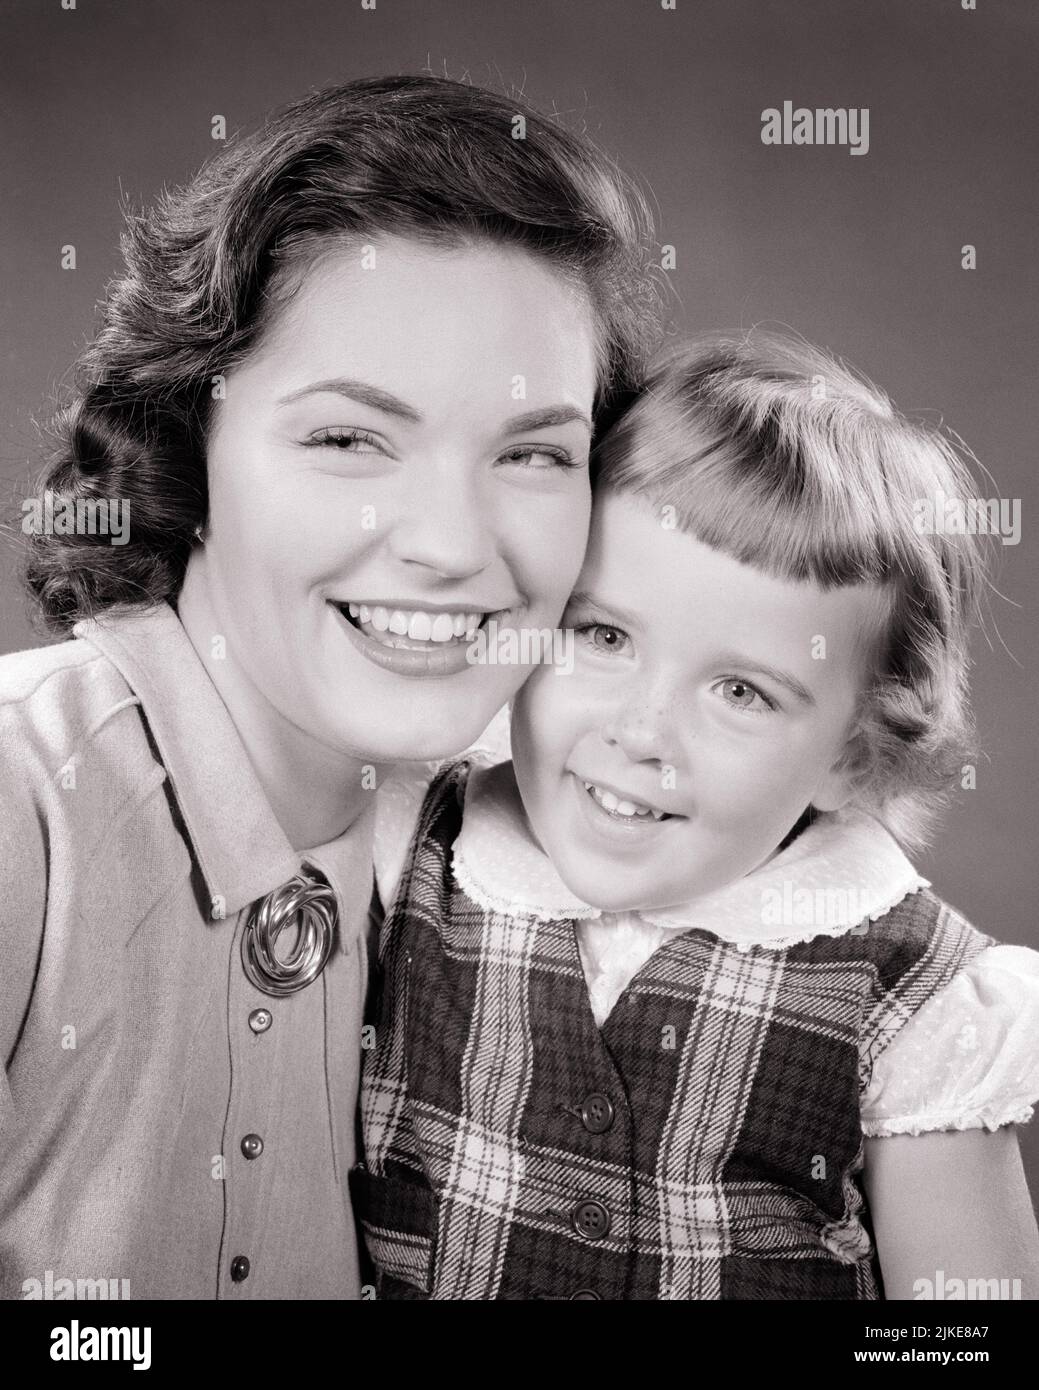 1950s Smiling Portrait Of Brunette Mother And Her Daughter Wearing A